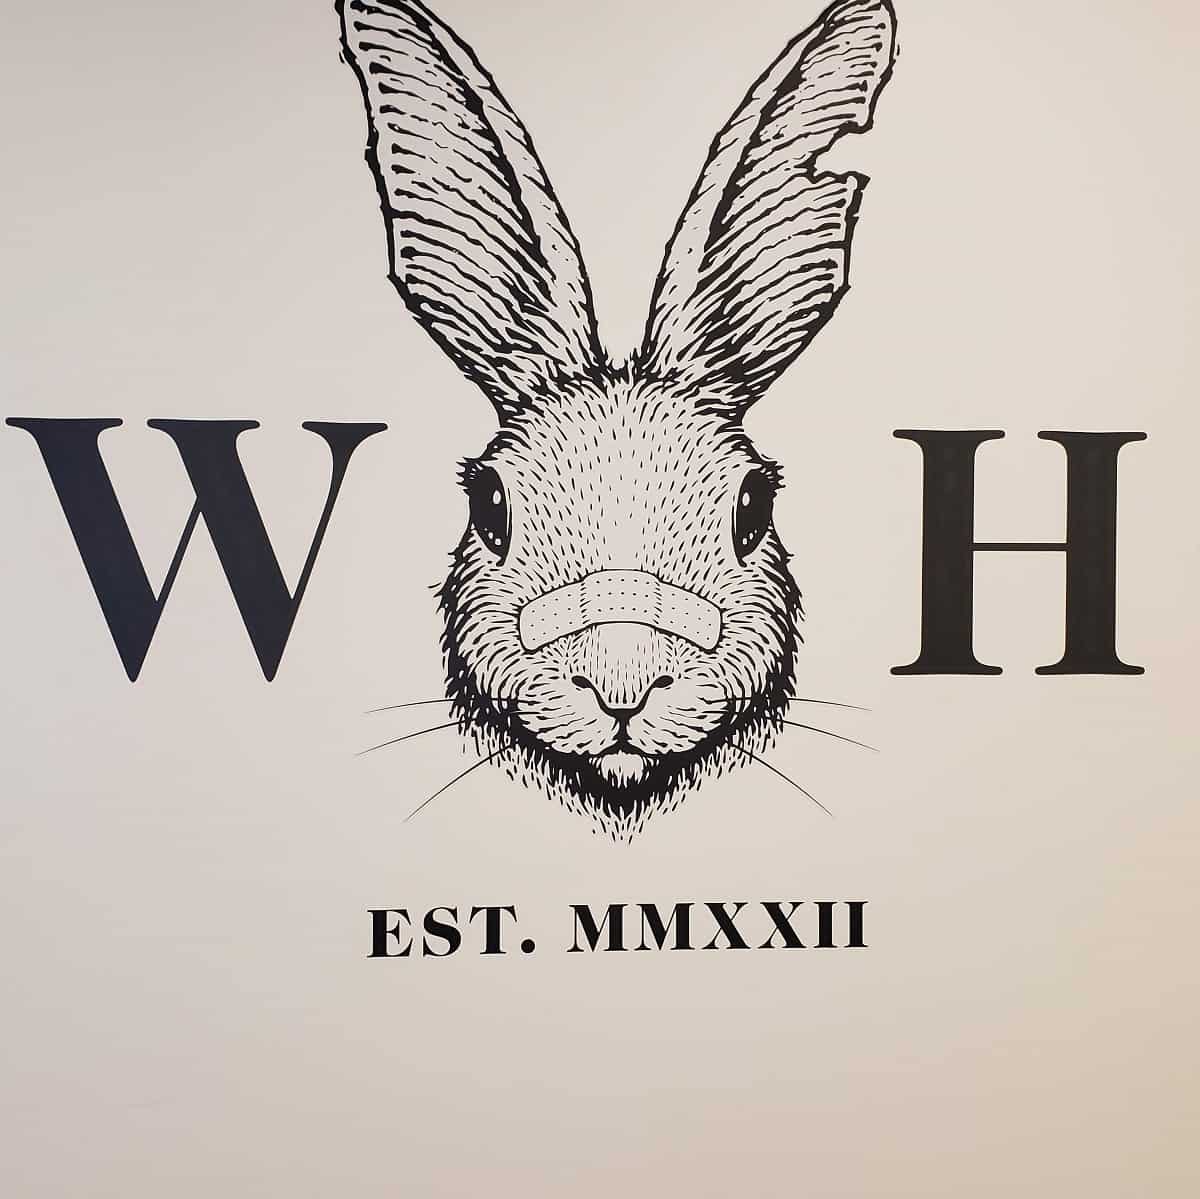 A photo of the Wild Hare restaurant logo.